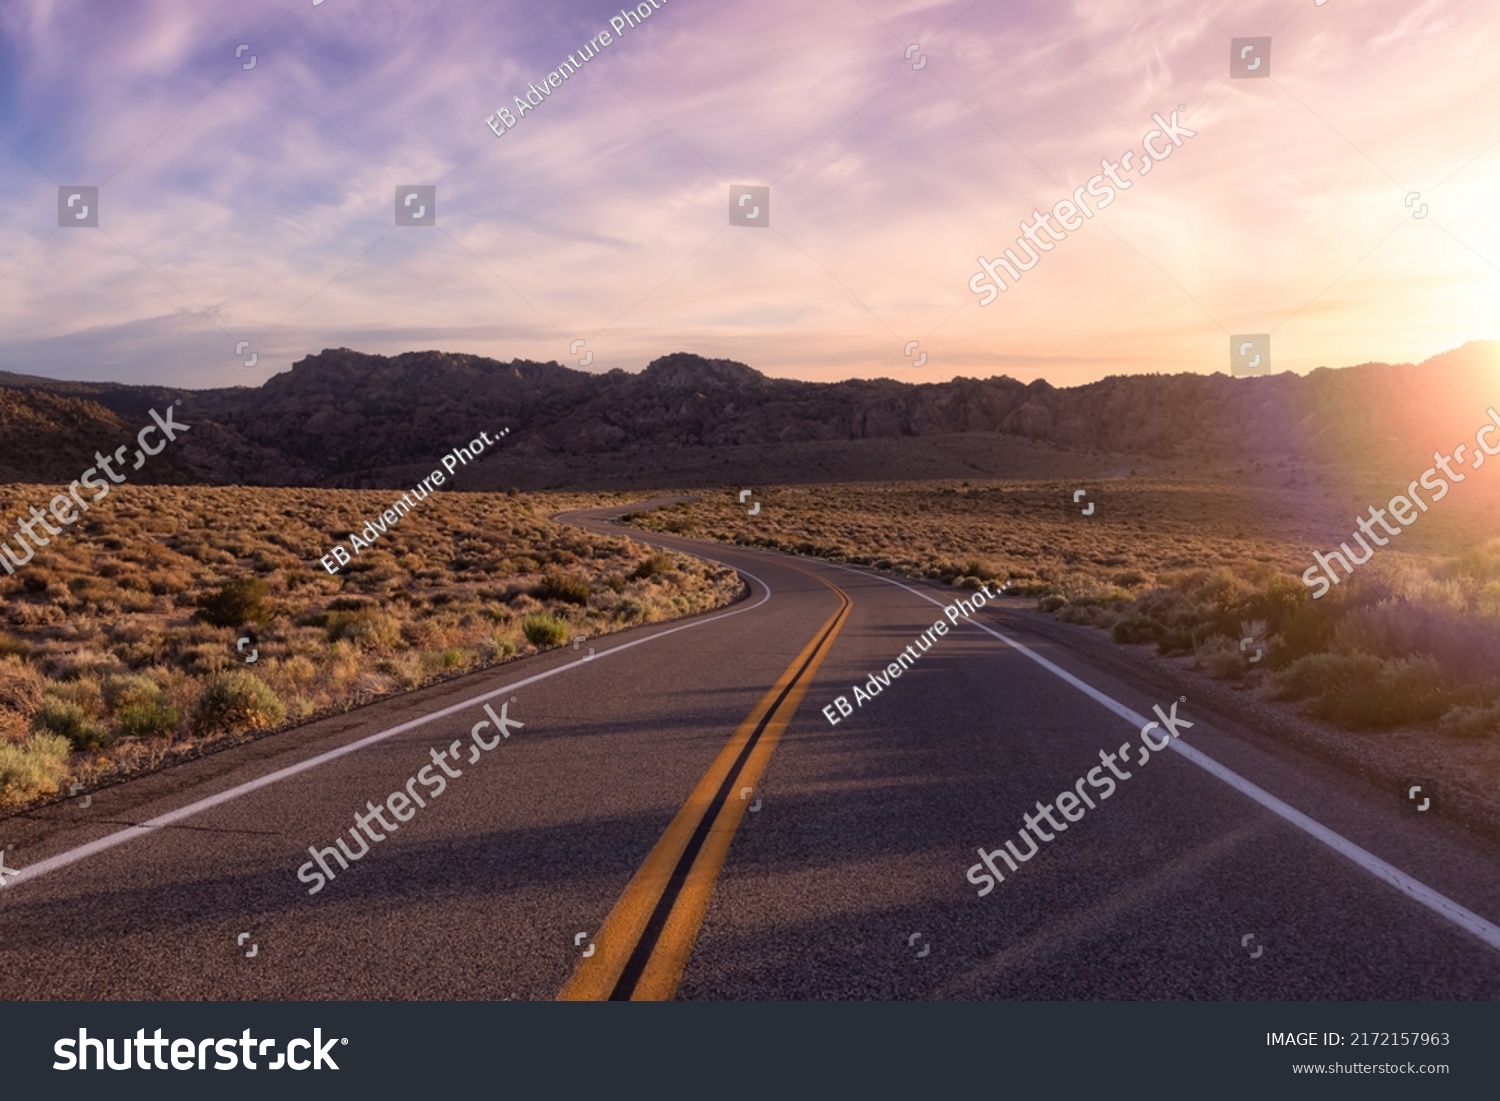 Scenic highway in the mountain landscape. Sunset Sky Art Render. State Route 120, California, United States of America. Adventure Travel #2172157963